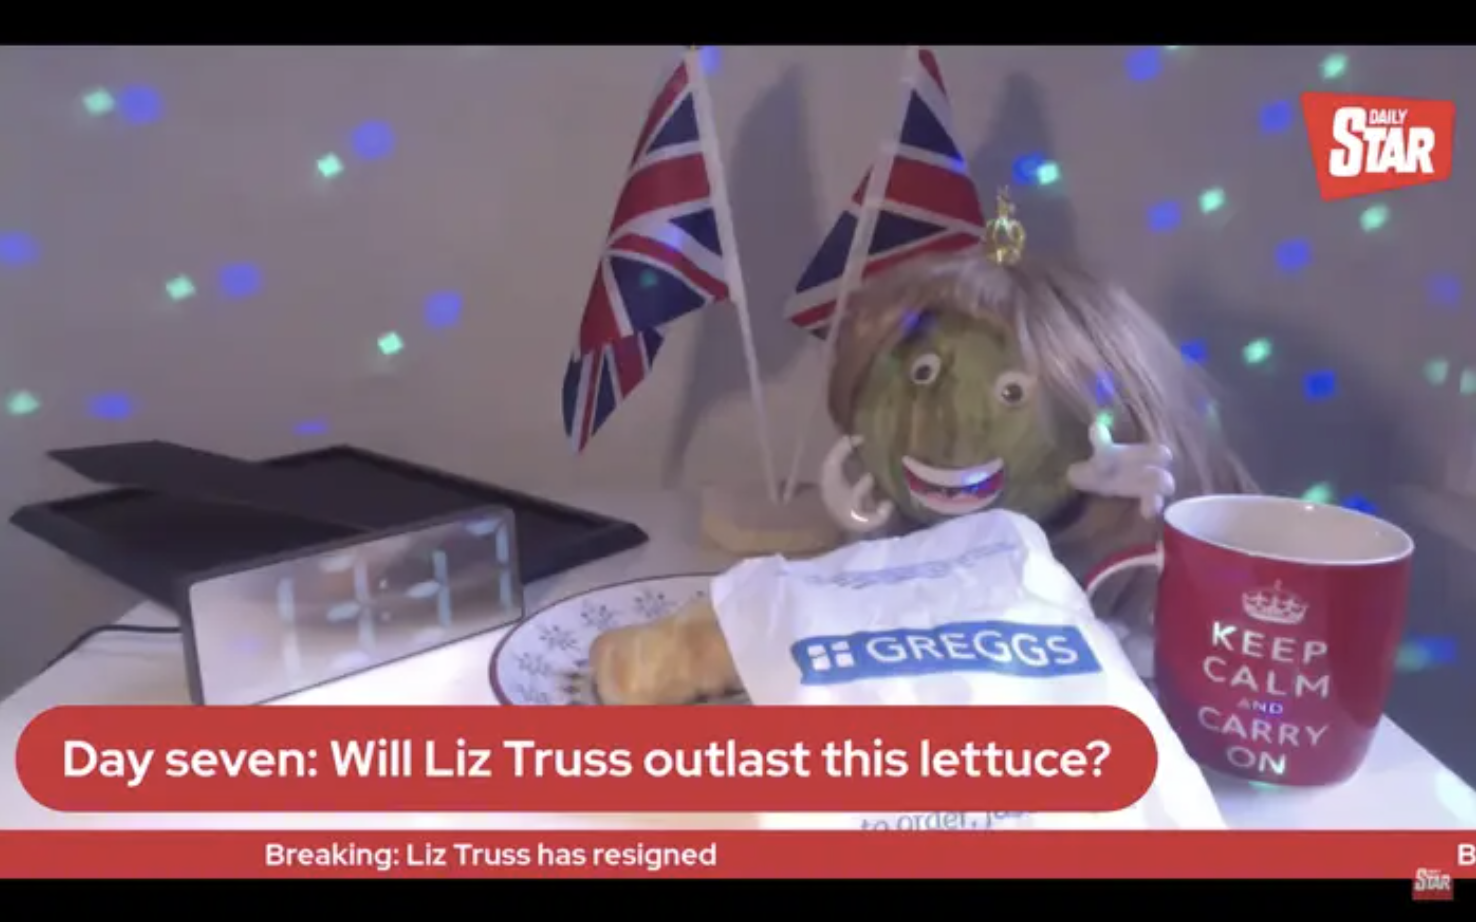 a screenshot of a youtube video featuring a head of lettuce with a smile and googley eyes and a wig, next to union jack flags and a keep calm and carry on. the text at the bottom reads &quot;day seven: will liz truss outlast this lettuce?&quot;